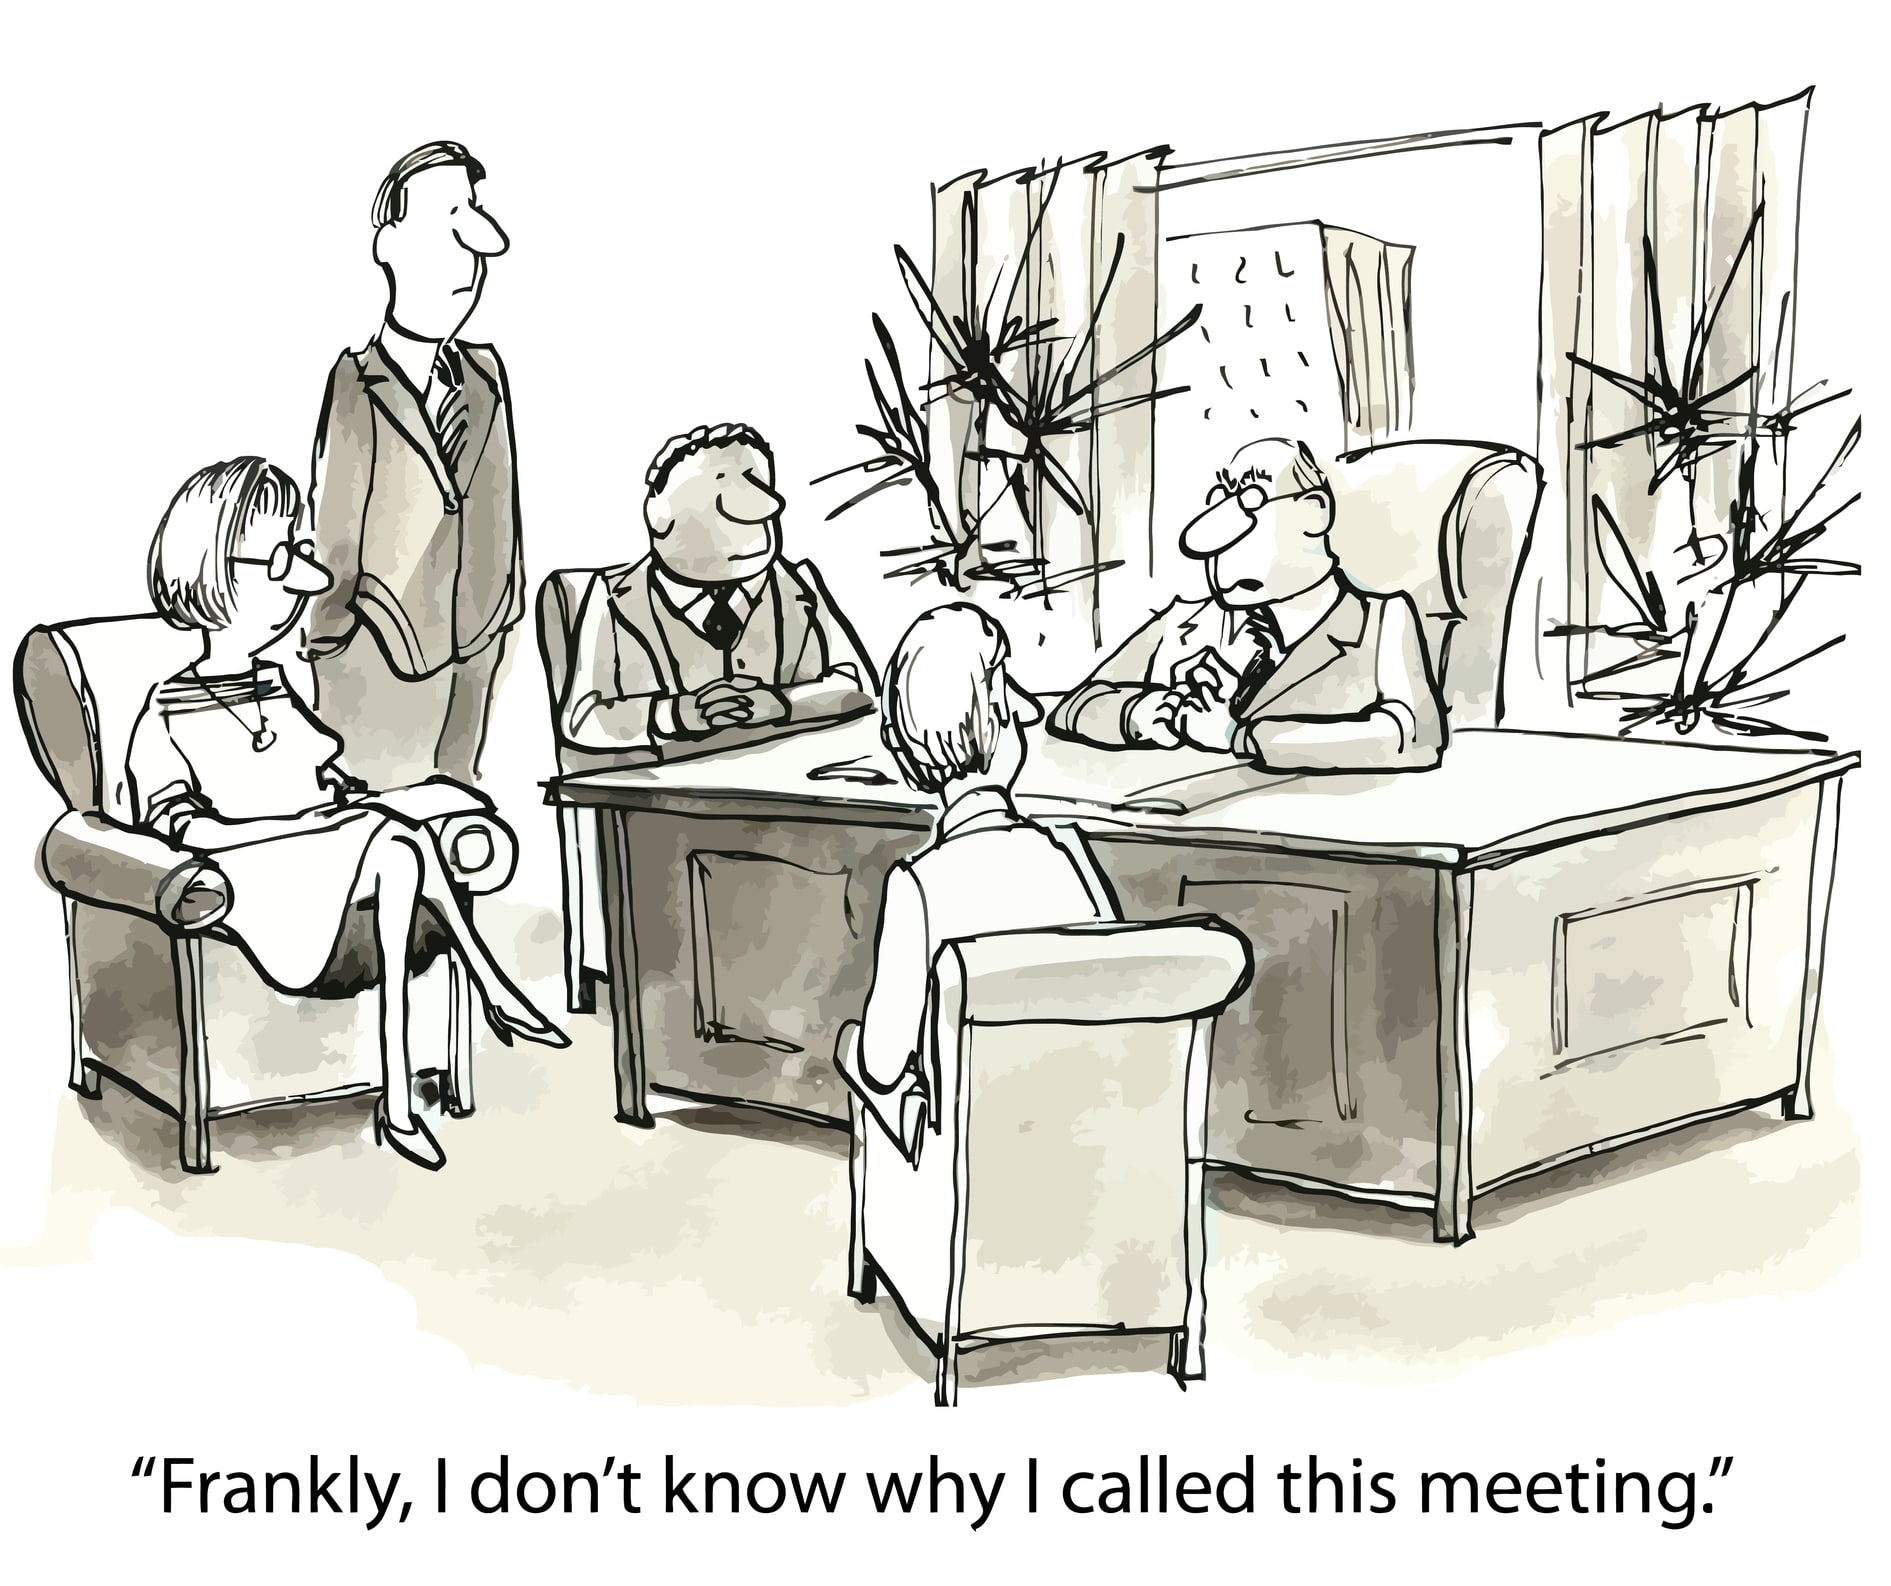 cartoon "Frankly, I don't know why I called this meeting."